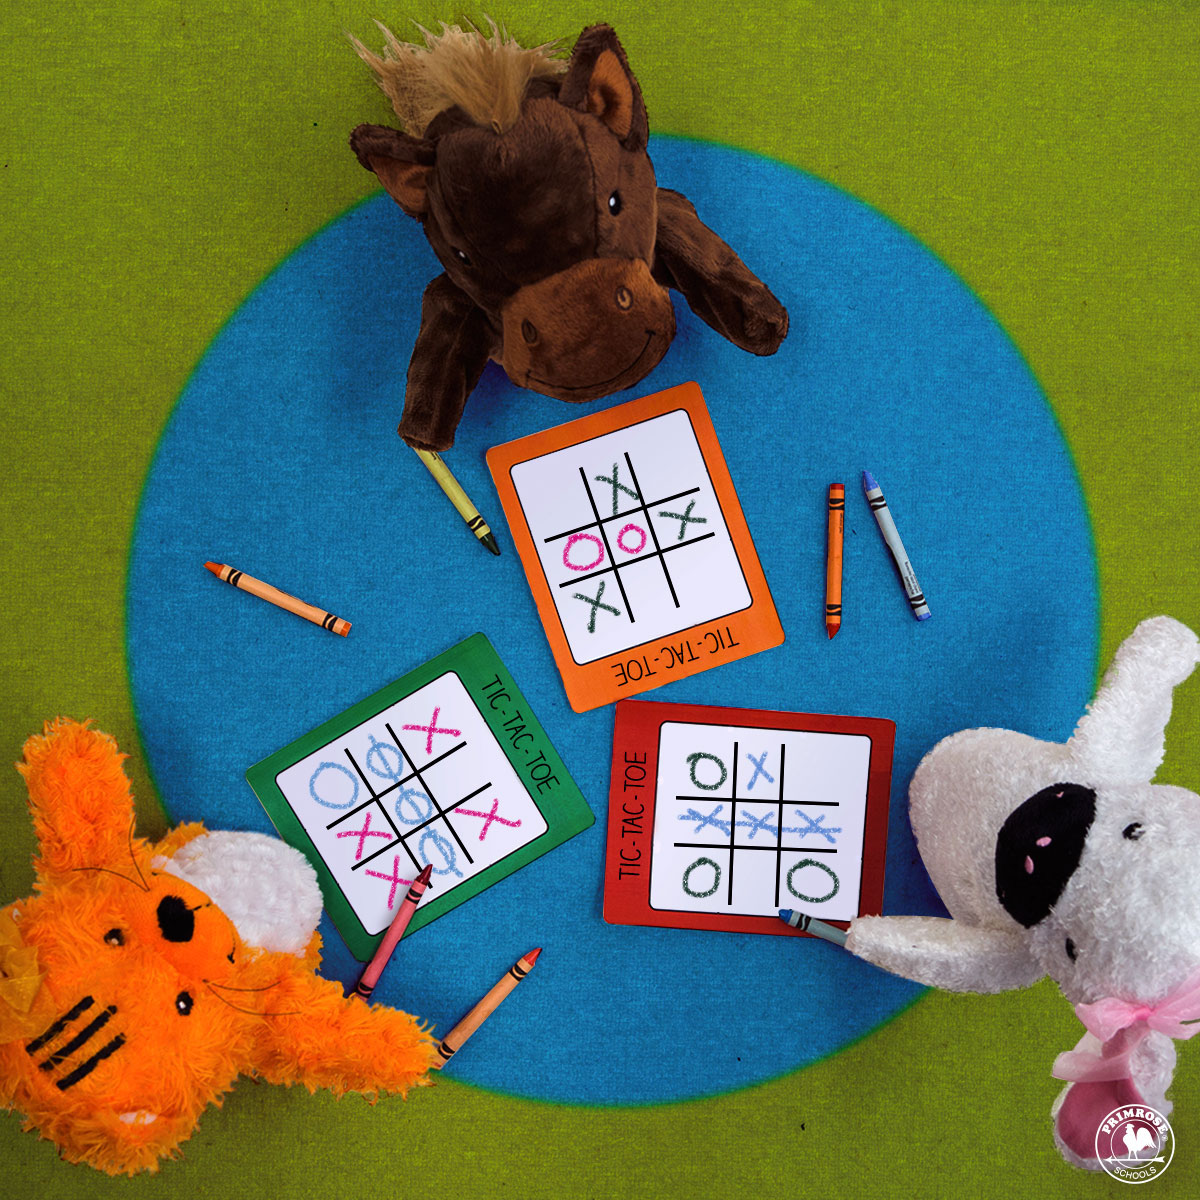 Primrose puppets Peanut the pony, Katie the cat and Libby the lamb play tic-tac-toe